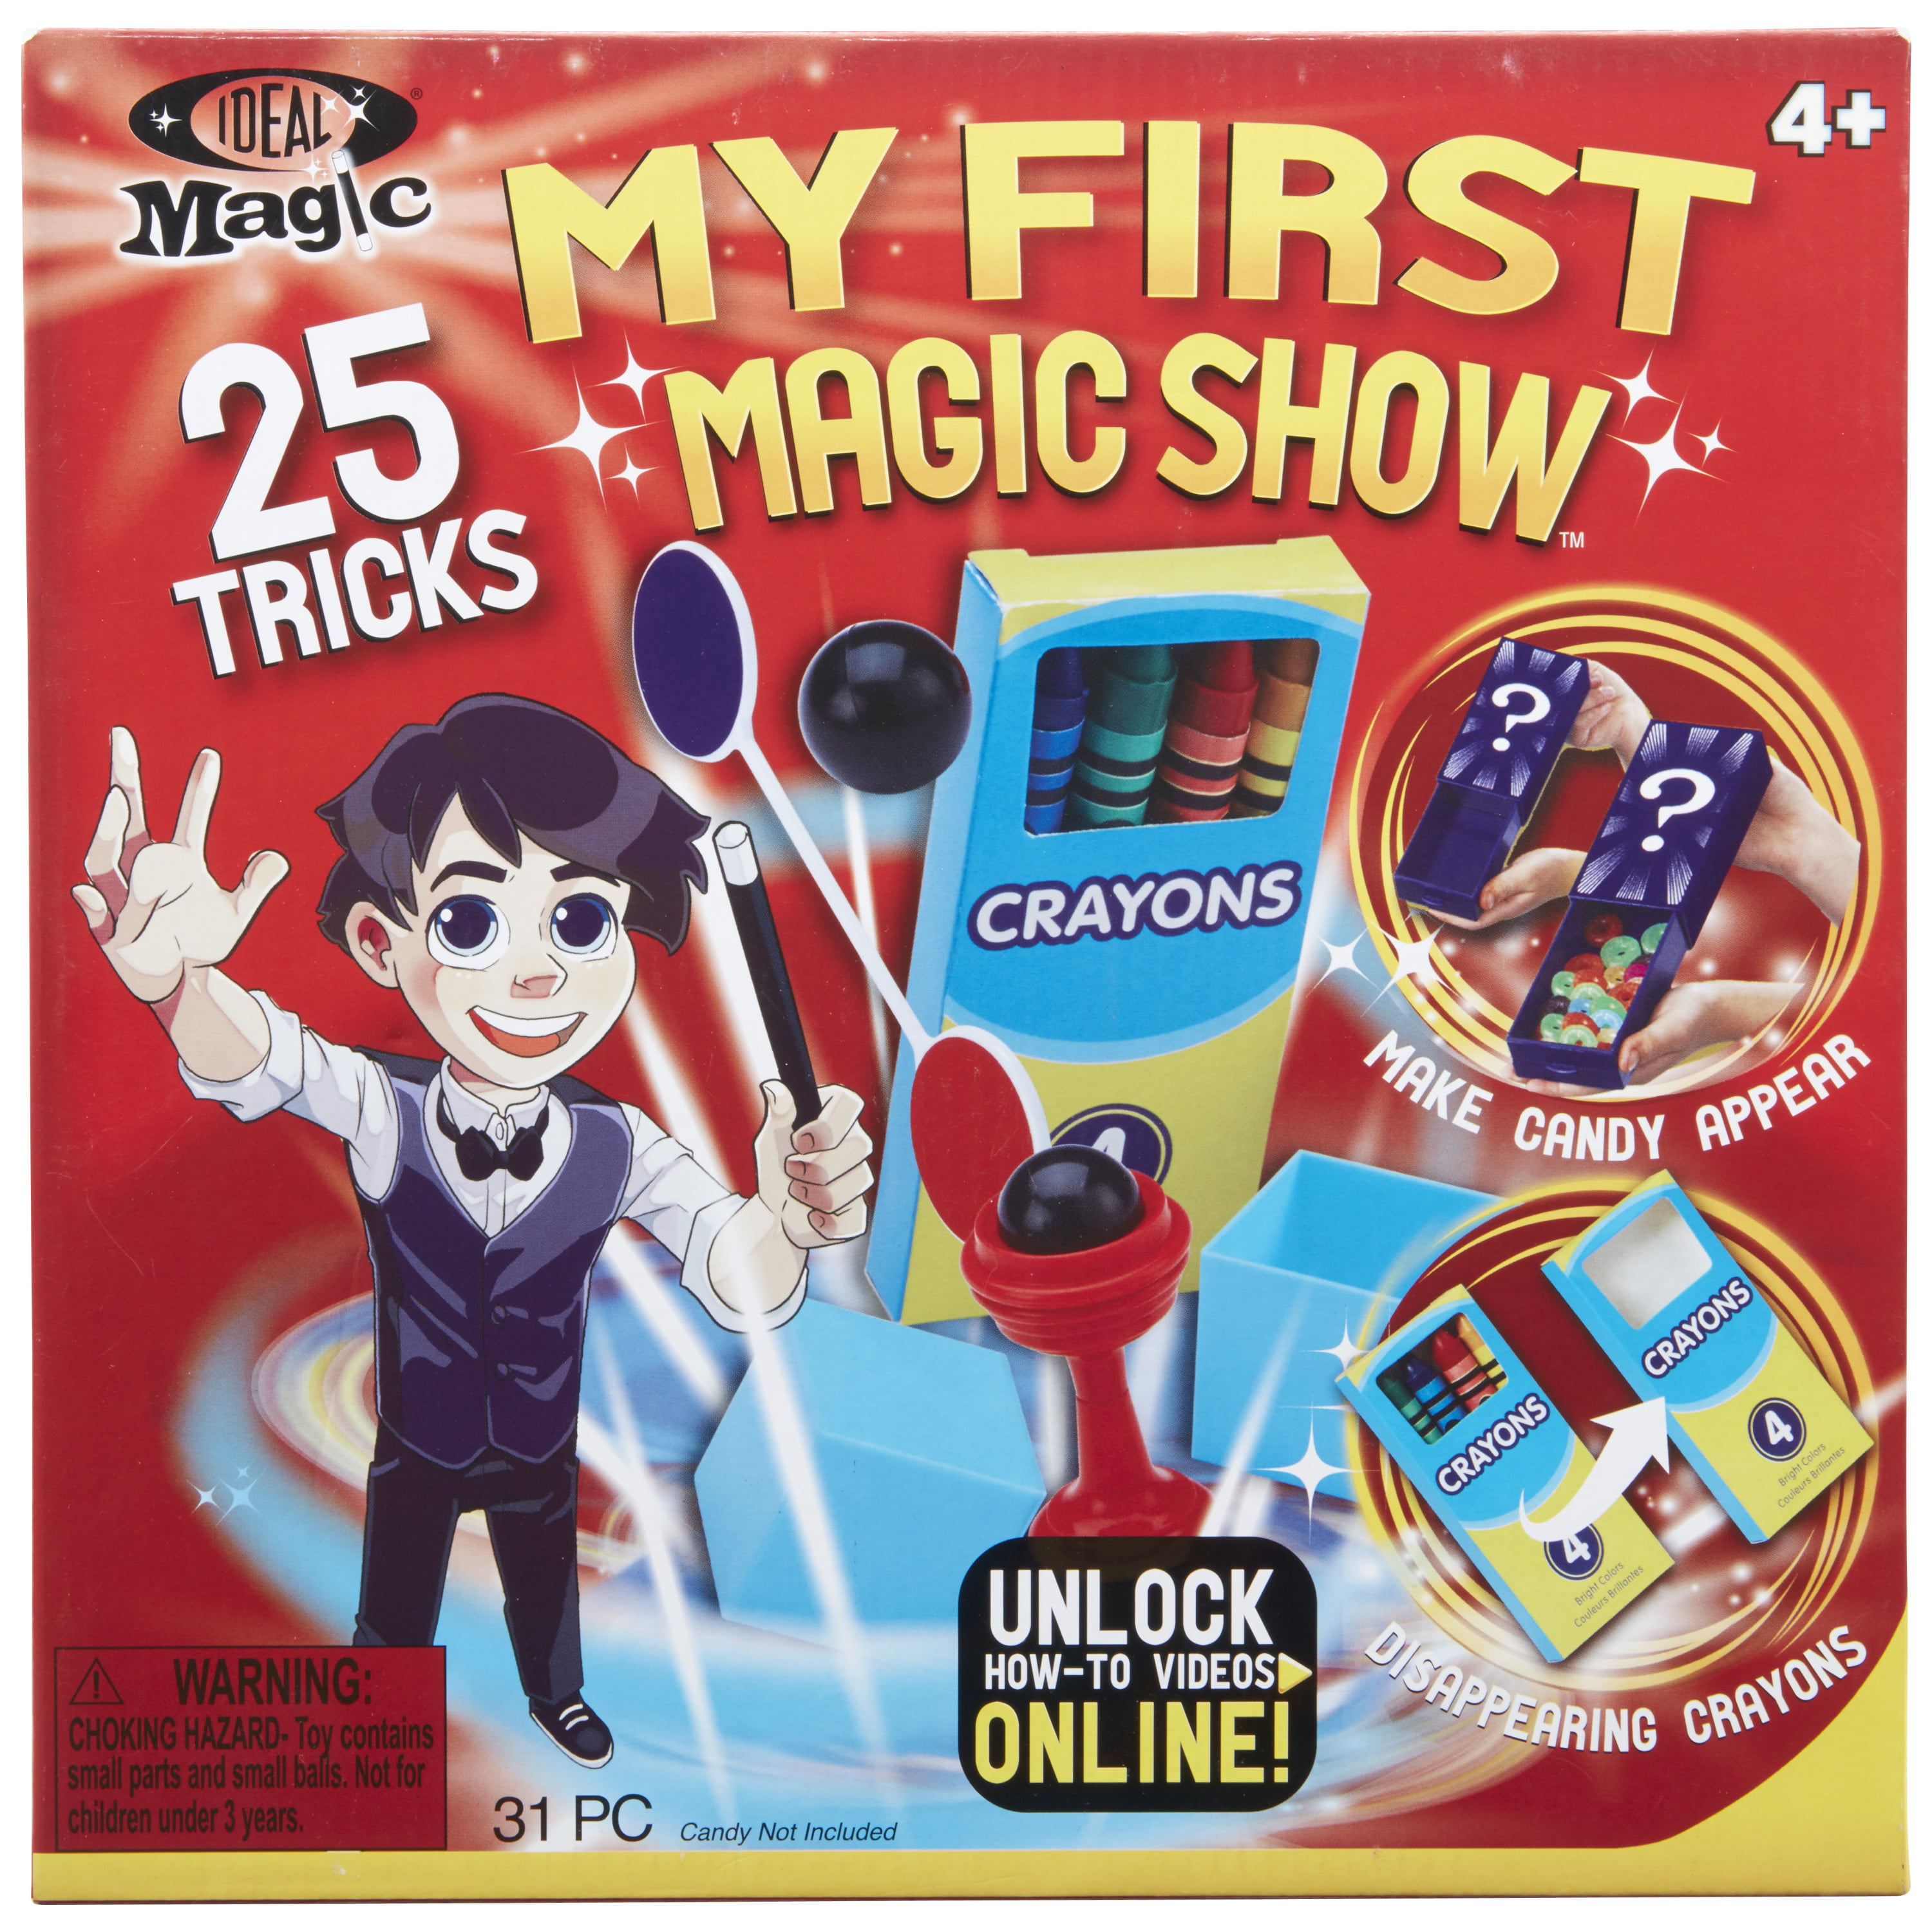 Funny Comedy Magic Magic Props Easy Show New Style Holiday Gifts Magic Tricks LI 